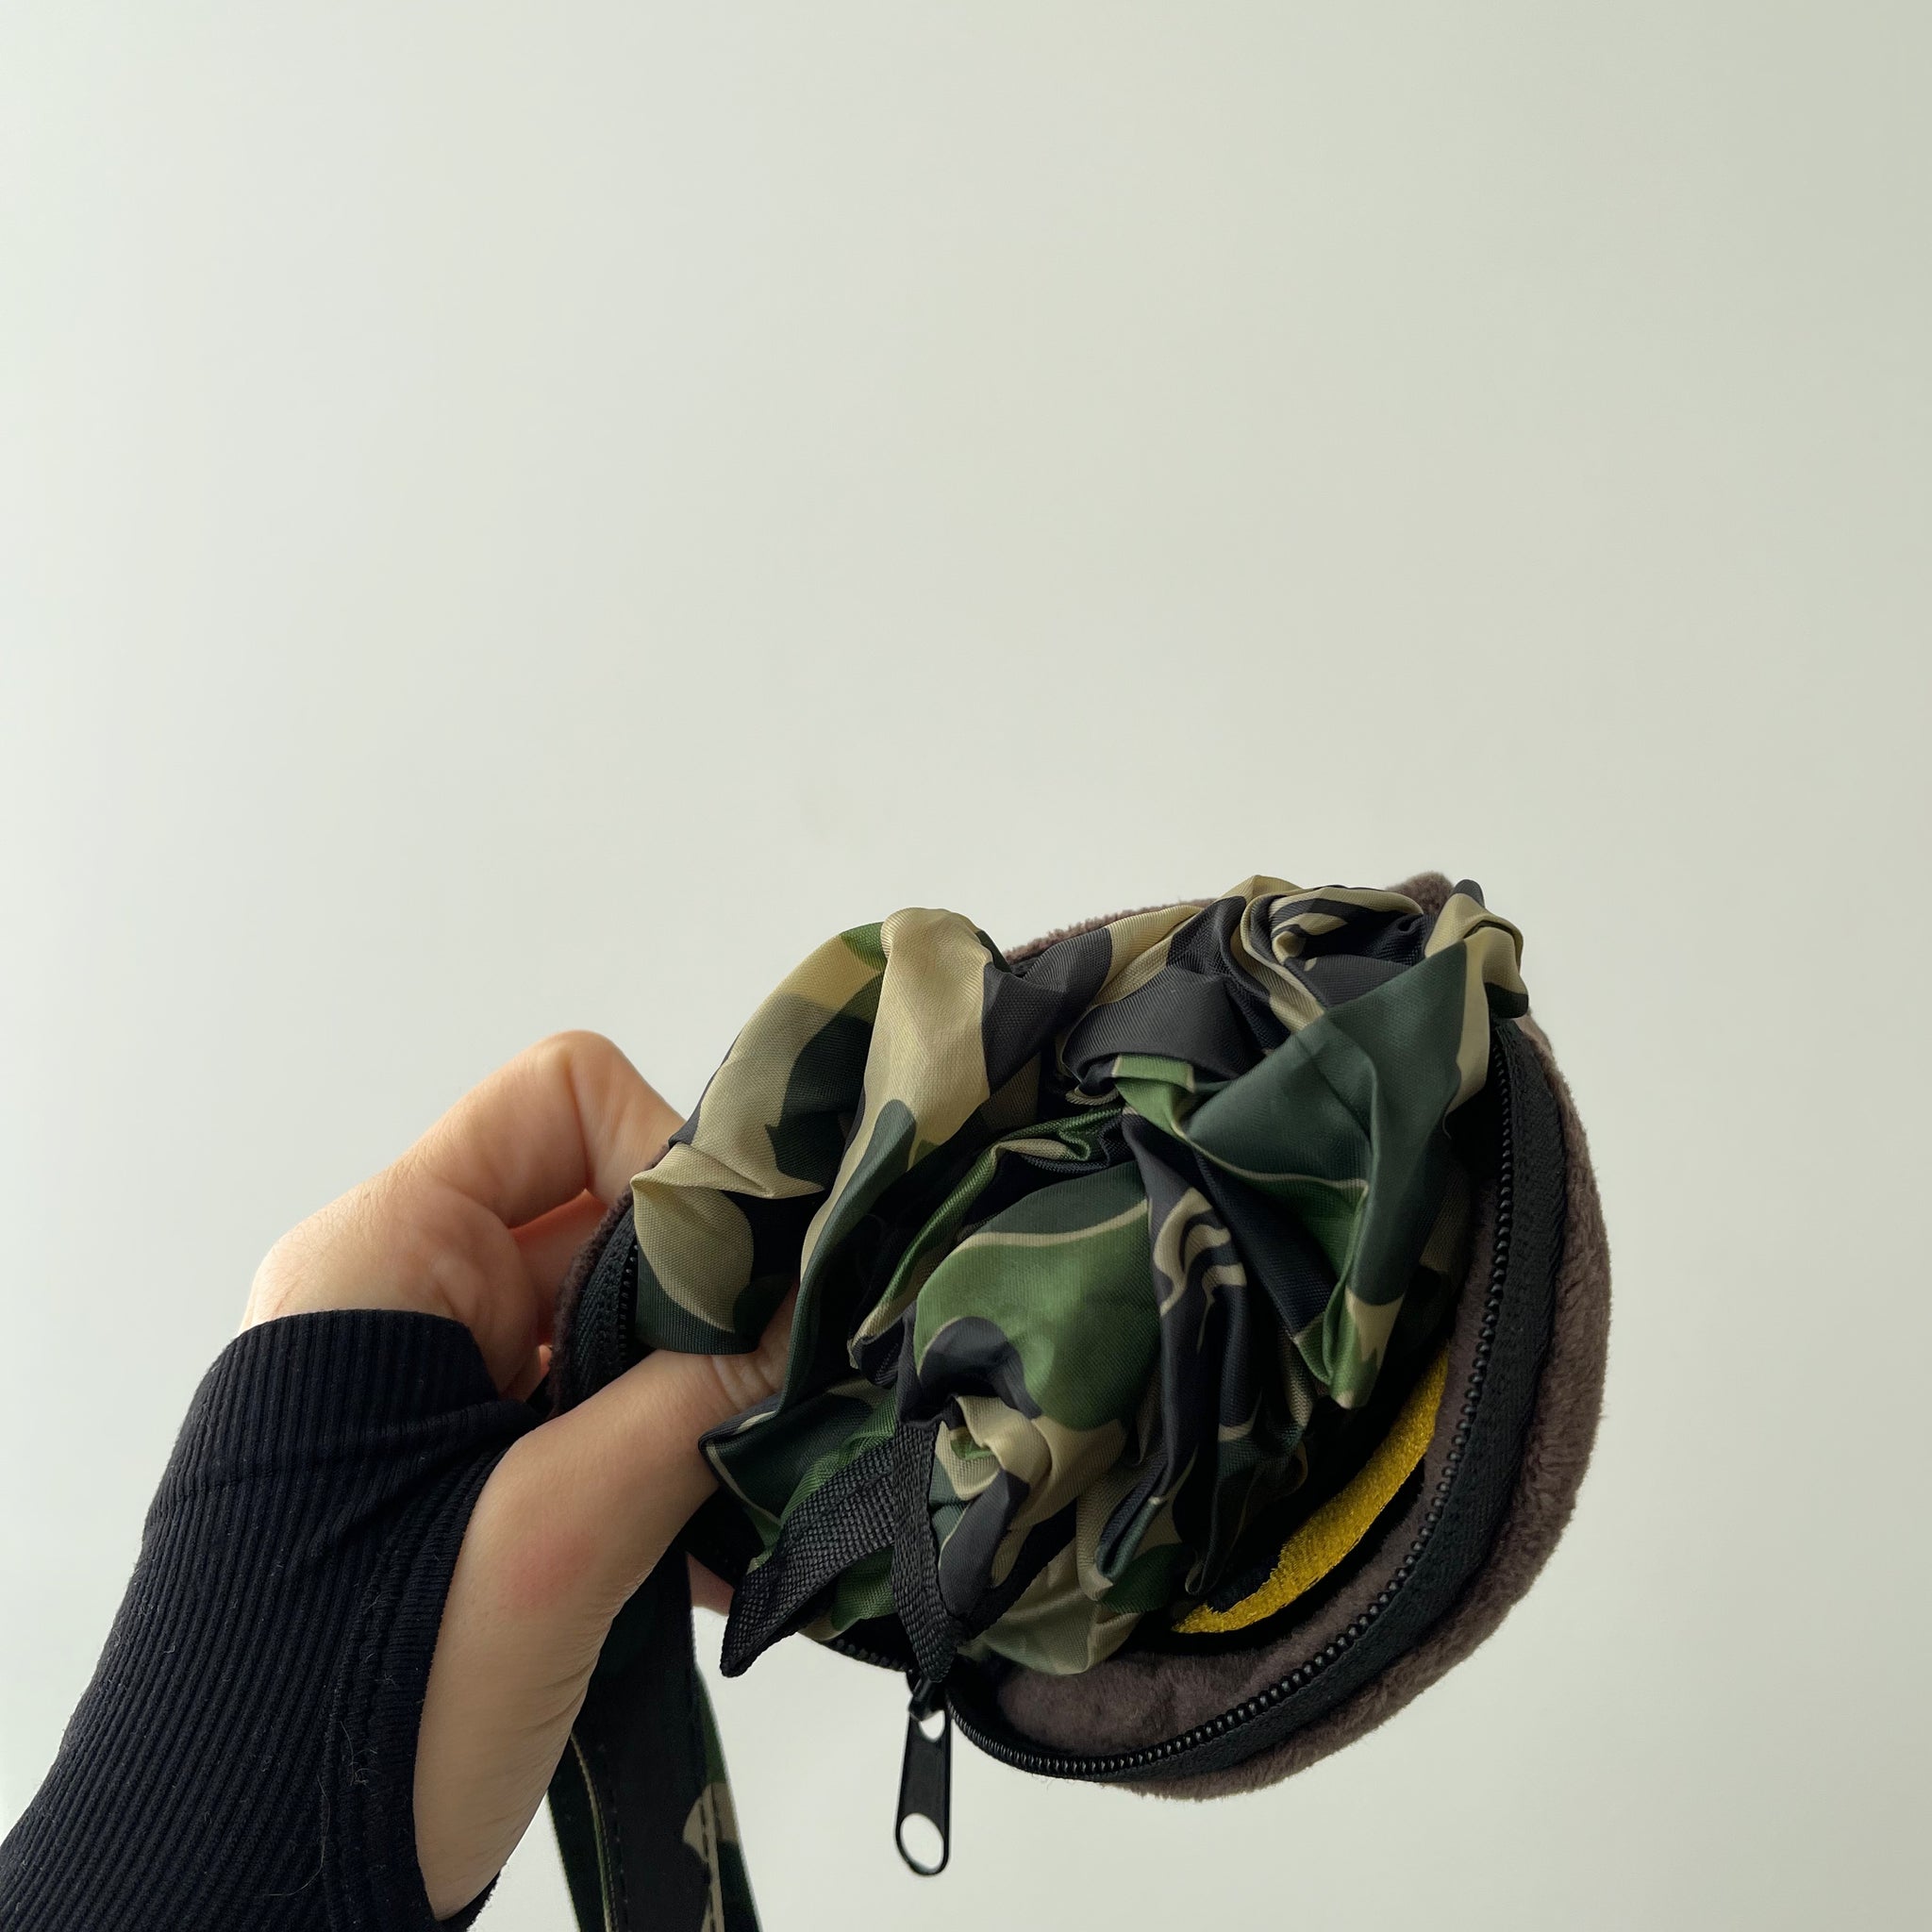 Bape 2 in 1 Tote Bag and Foldable Tote Keyring